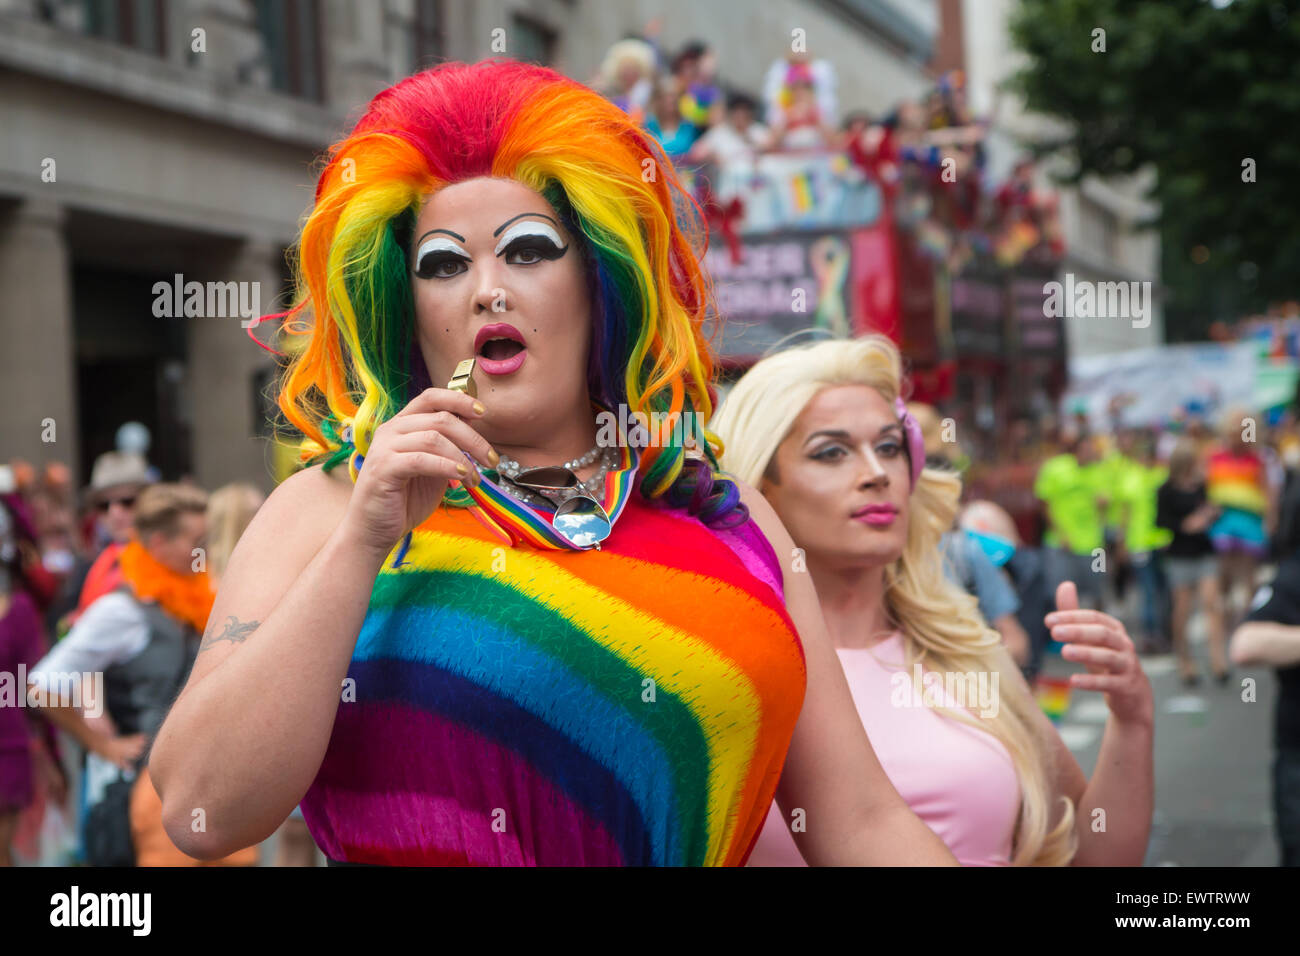 Drag Queen dress in rainbow at Pride in London 2015 Stock Photo